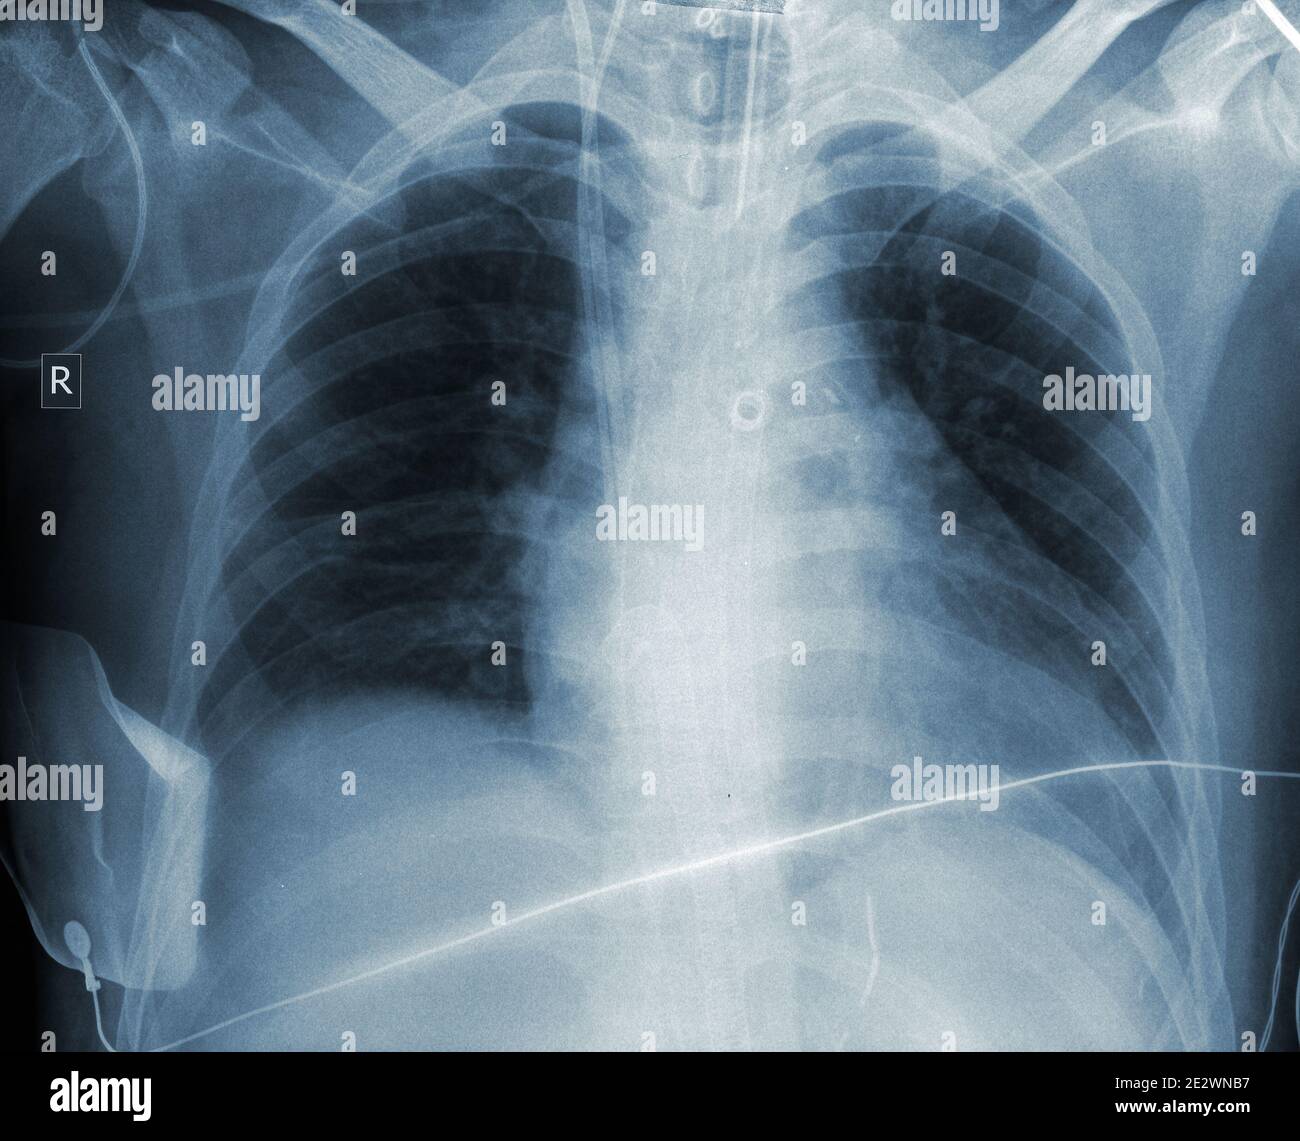 Radiogram result of patient chest. Stock Photo